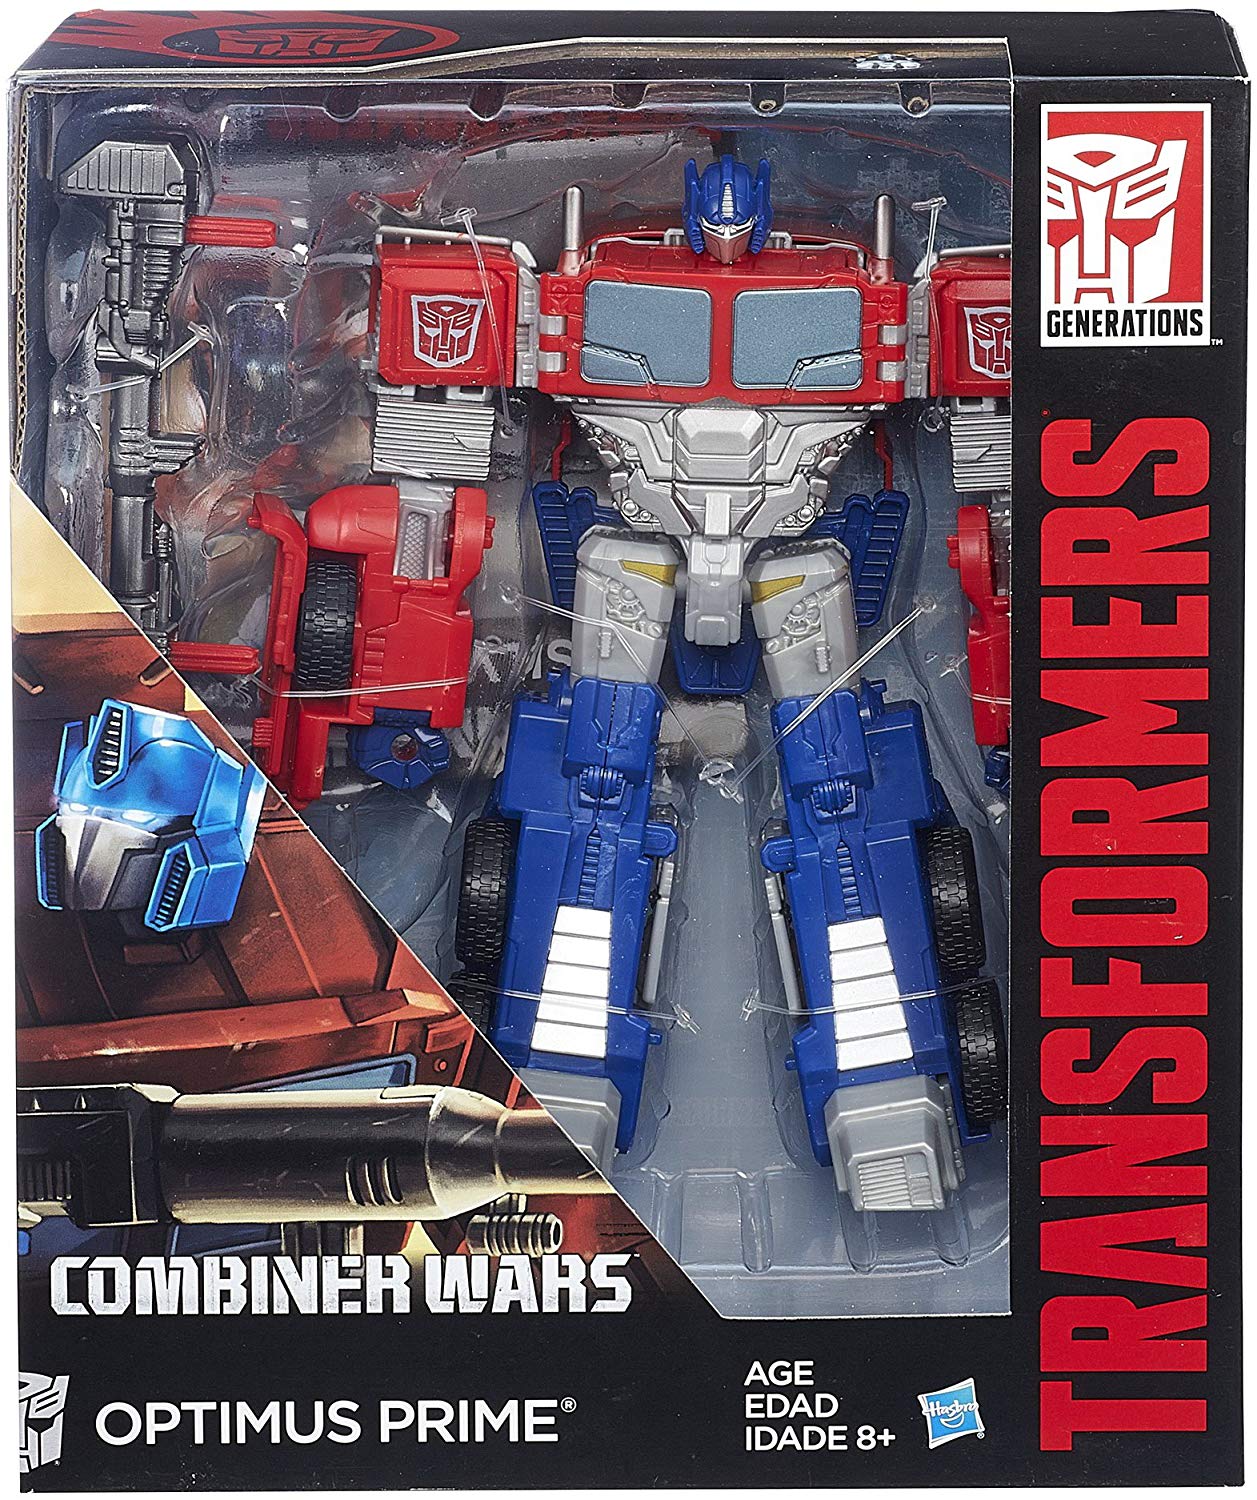 Transformers Generations Combiner Wars Voyager Class Optimus Prime Action Figure 1